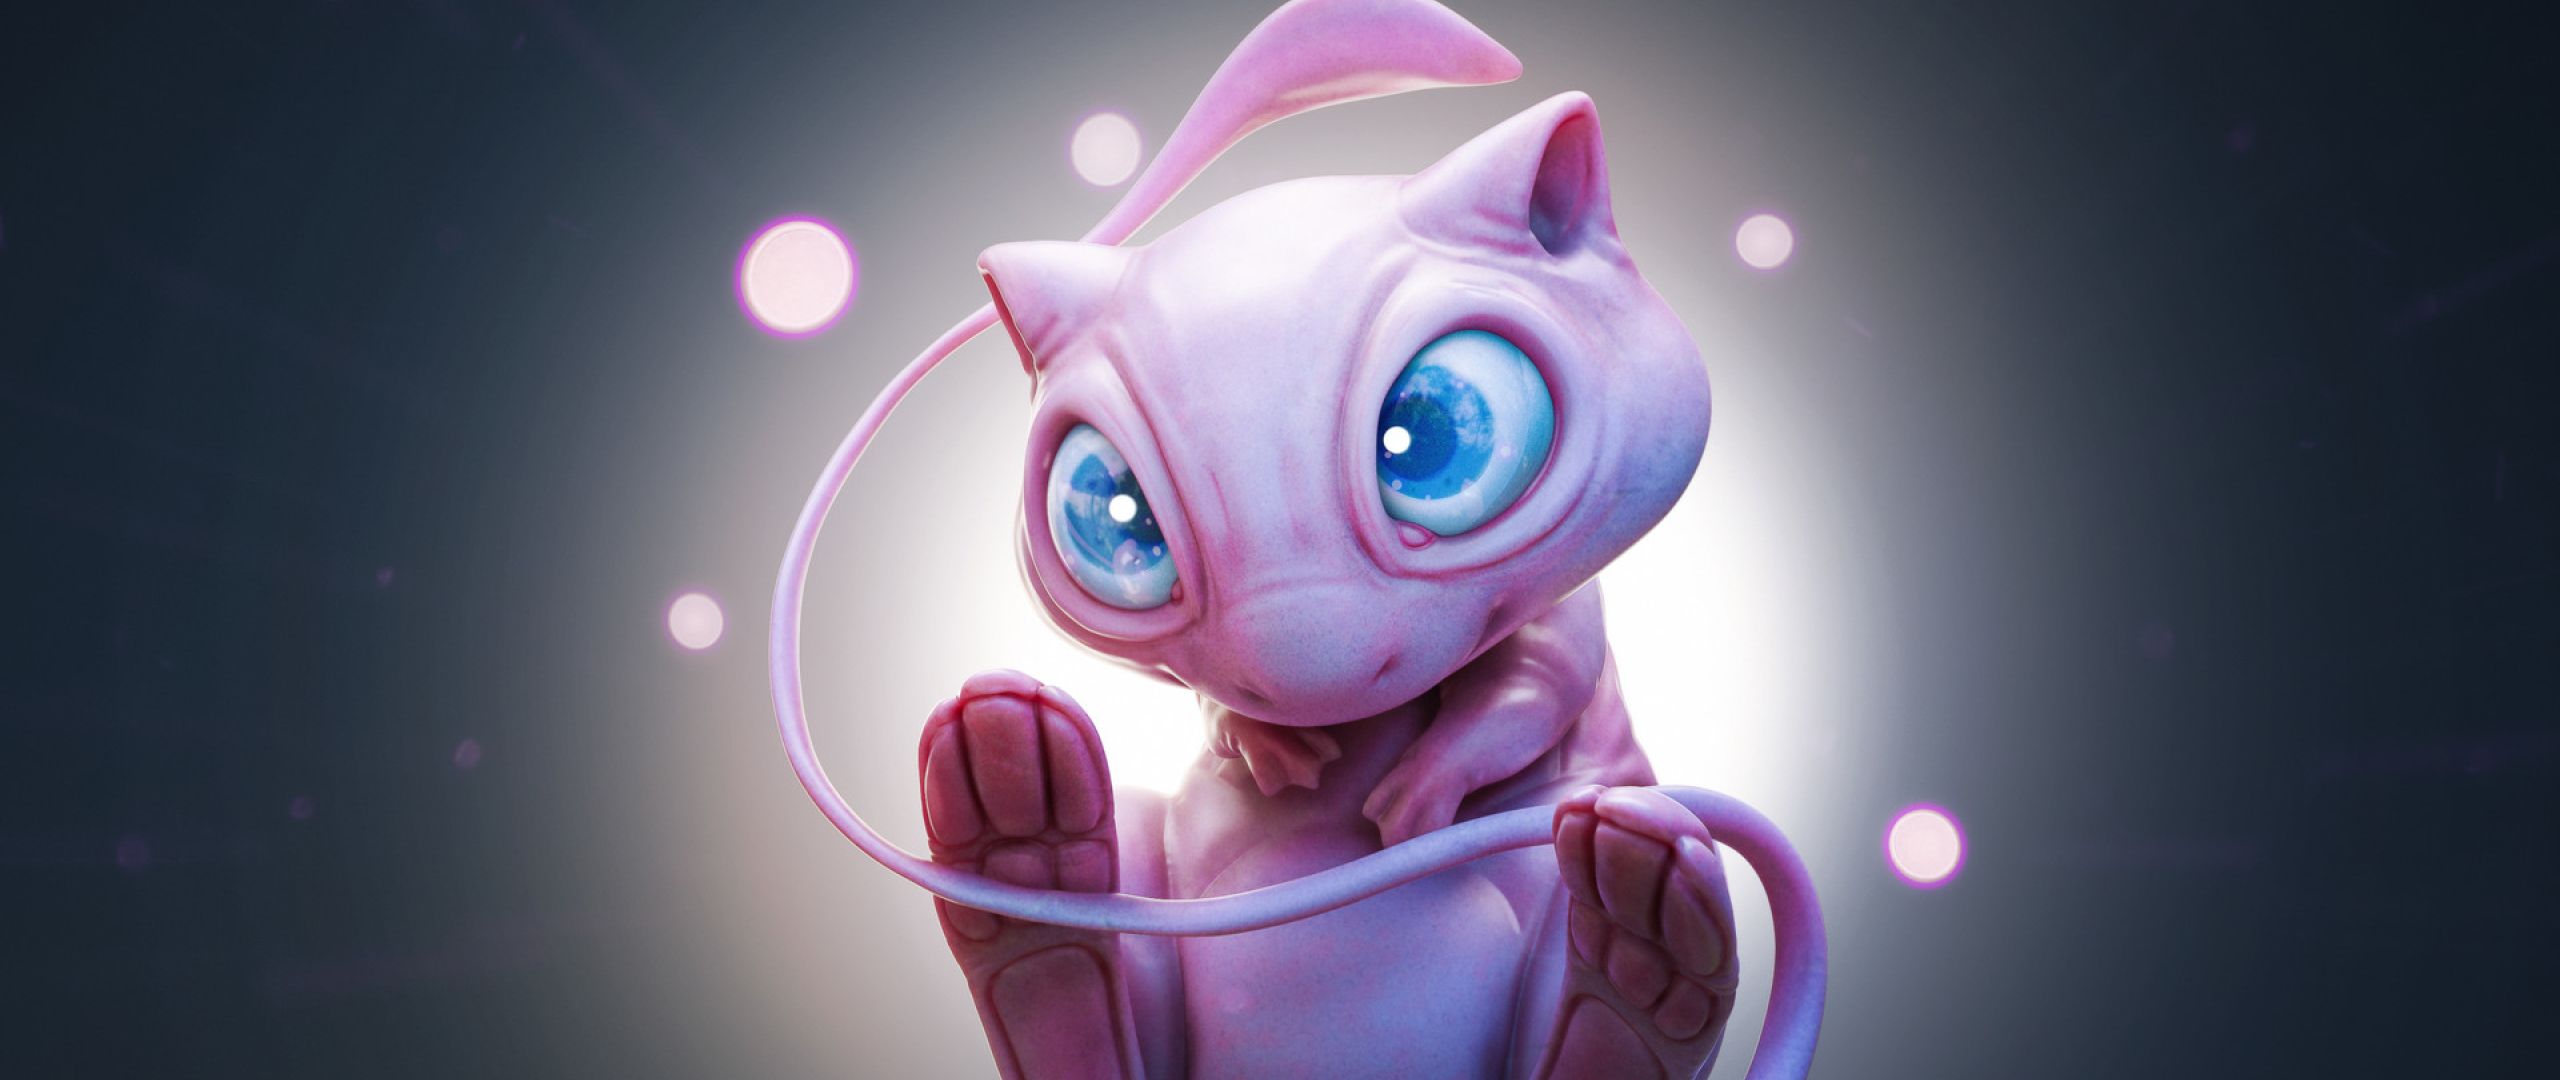 Mew Pokemon in Detective Pikachu 2560x1080 Resolution Wallpaper, HD Movies 4K Wallpaper, Image, Photo and Background